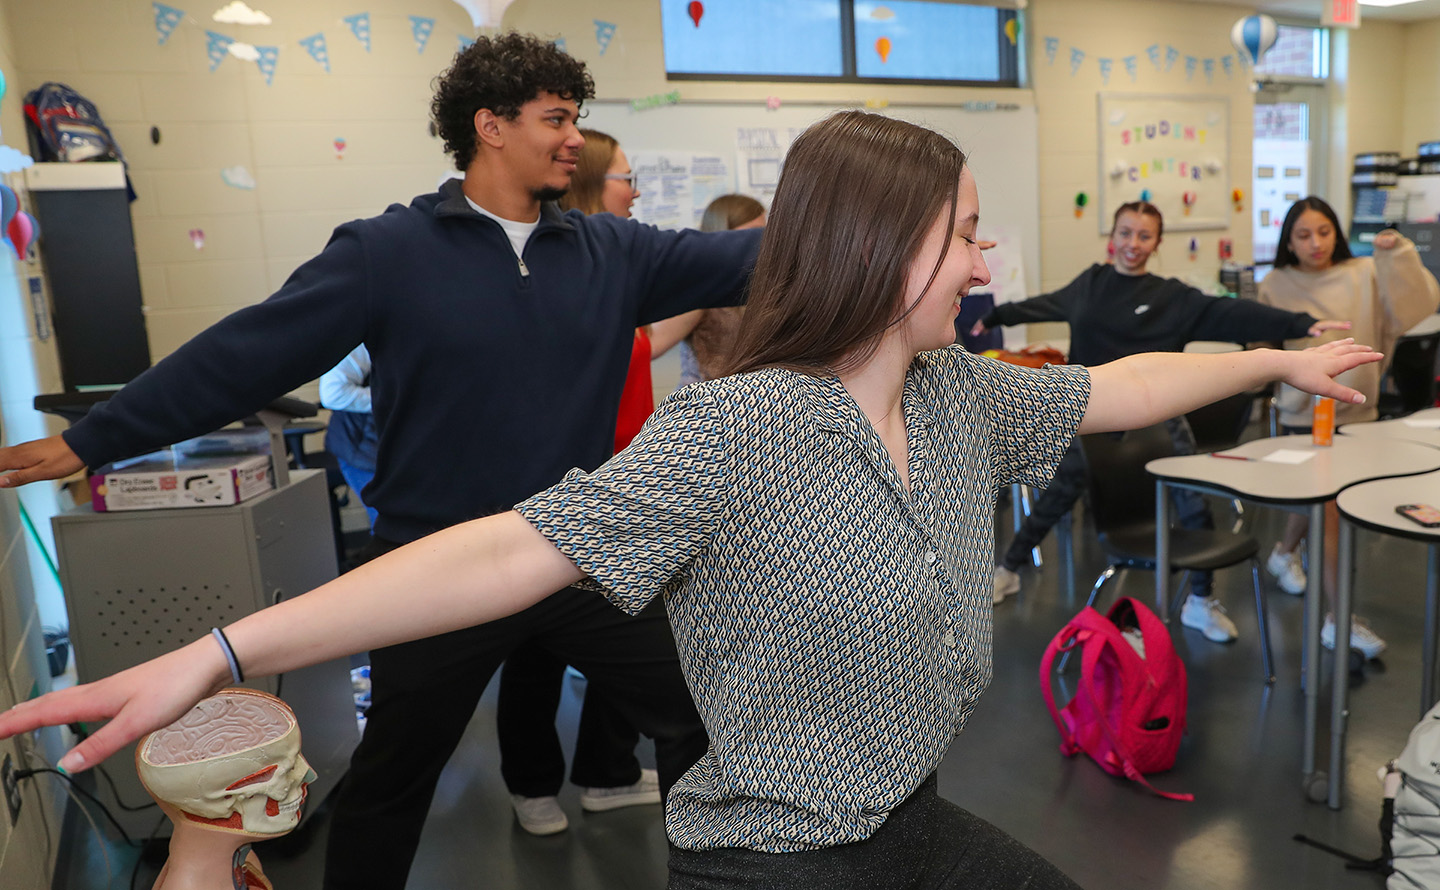 UNK senior Sam Burns, front, and other members of the social work student ambassador program lead a self-care exercise during a recent visit to Kearney High School. (Photo by Erika Pritchard, UNK Communications)